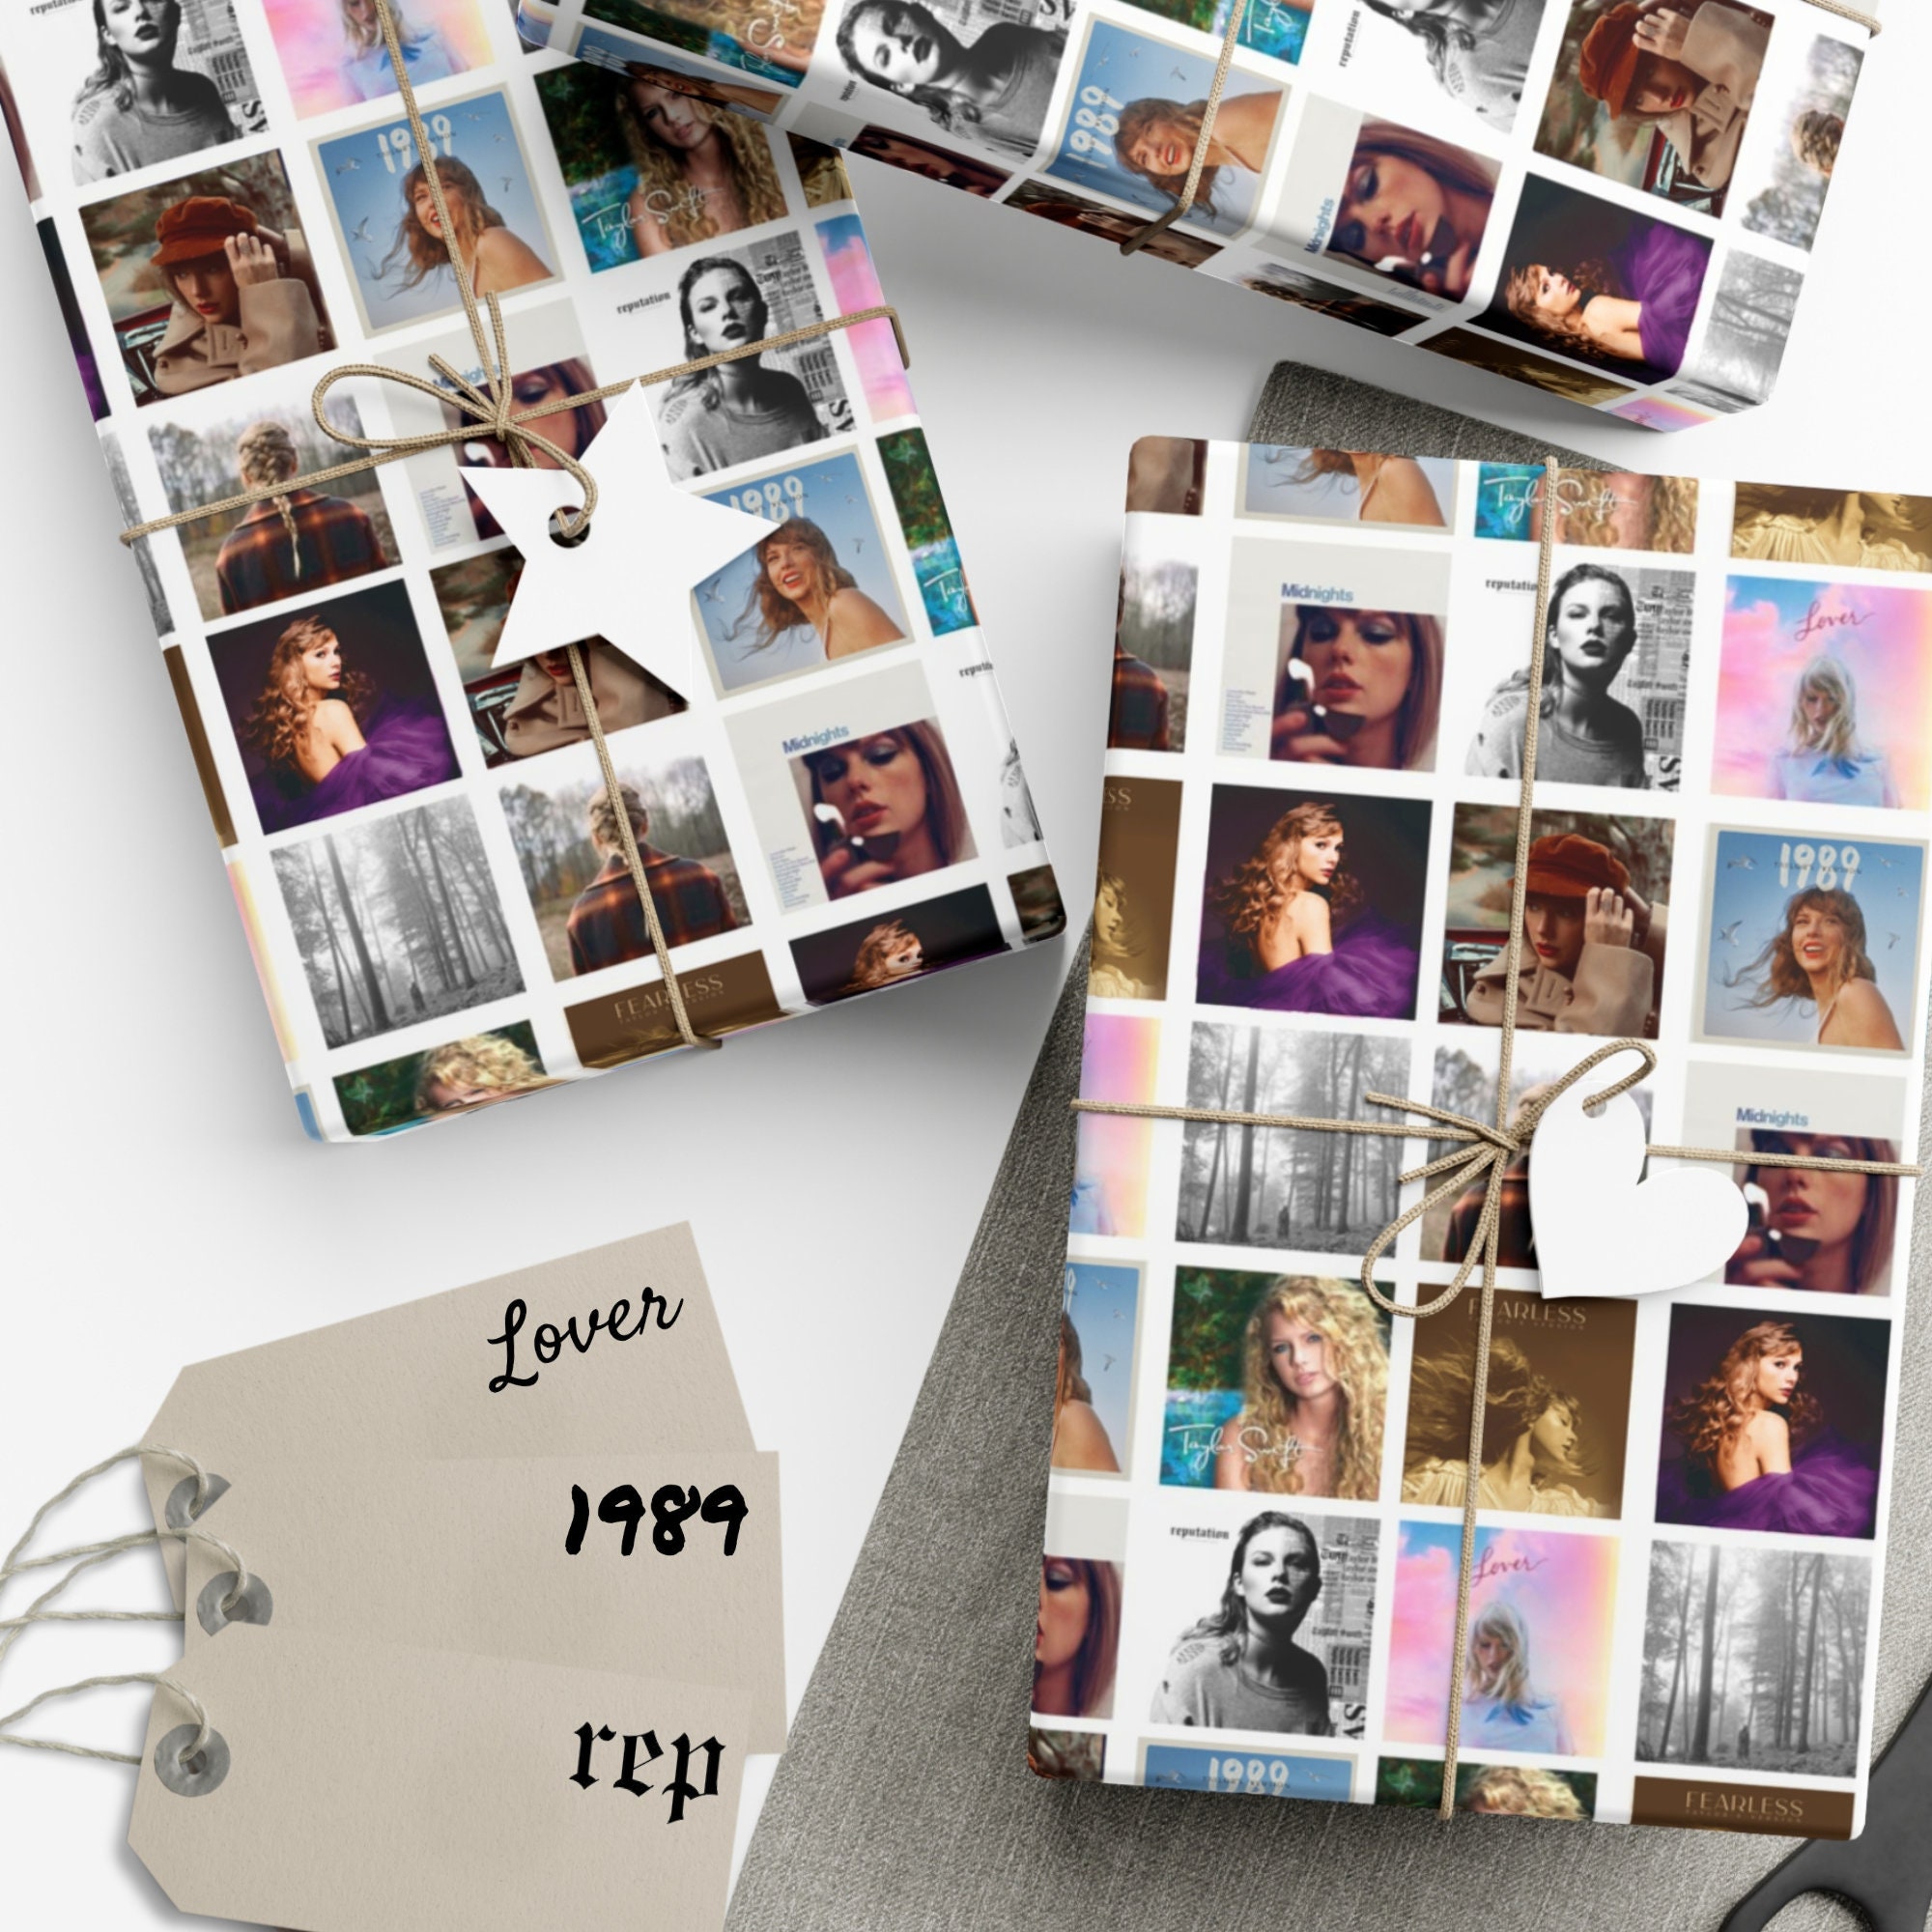 Taylor Swift Inspired Wrapping paper sheets — Super Awesome Mix